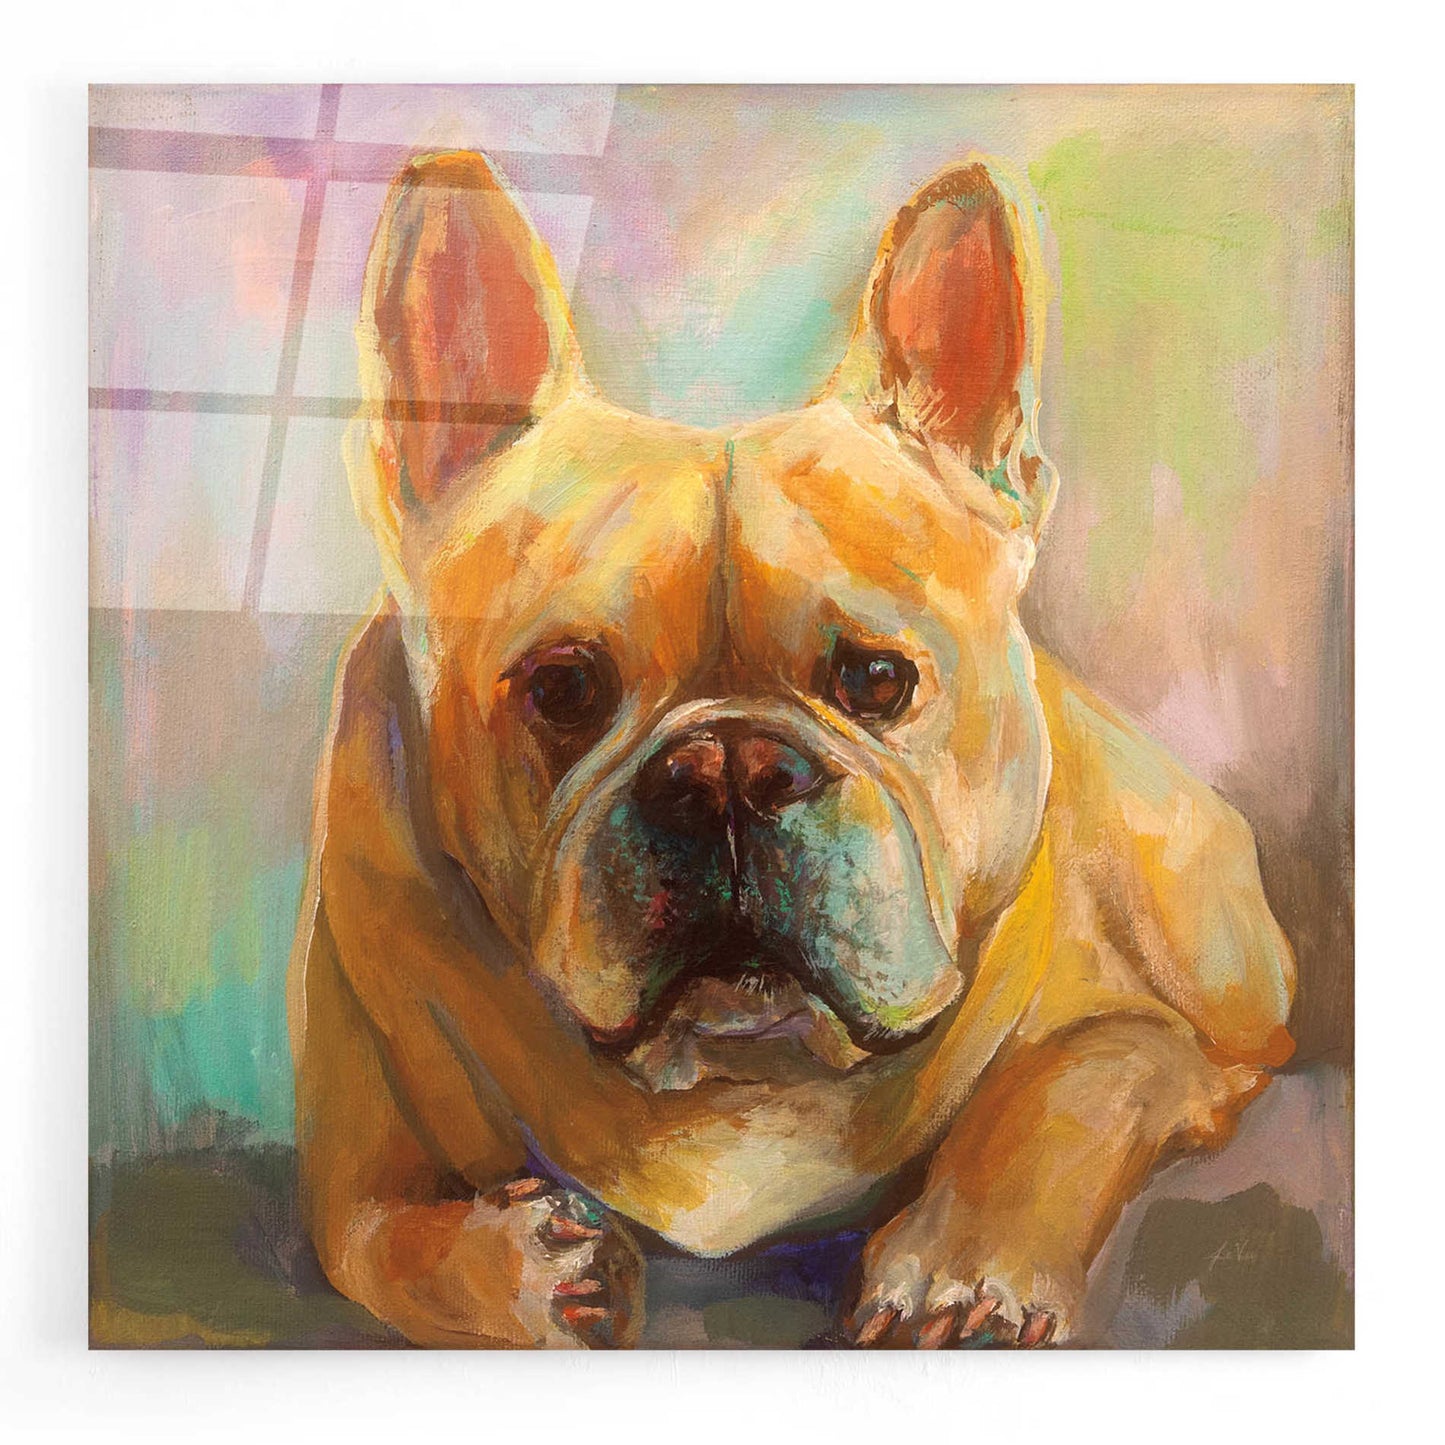 Epic Art 'Frenchie' by Jeanette Vertentes, Acrylic Glass Wall Art,12x12